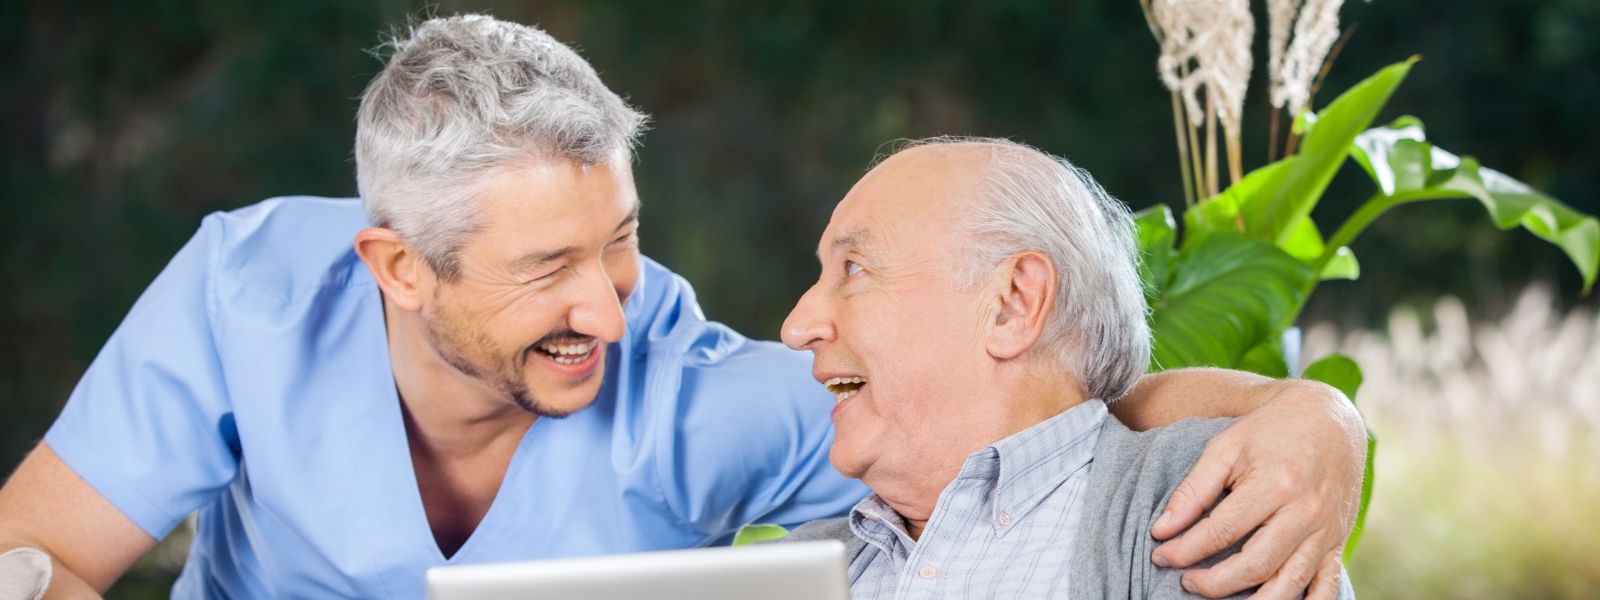 Older man chatting to middle aged man about natural factors for prostate health